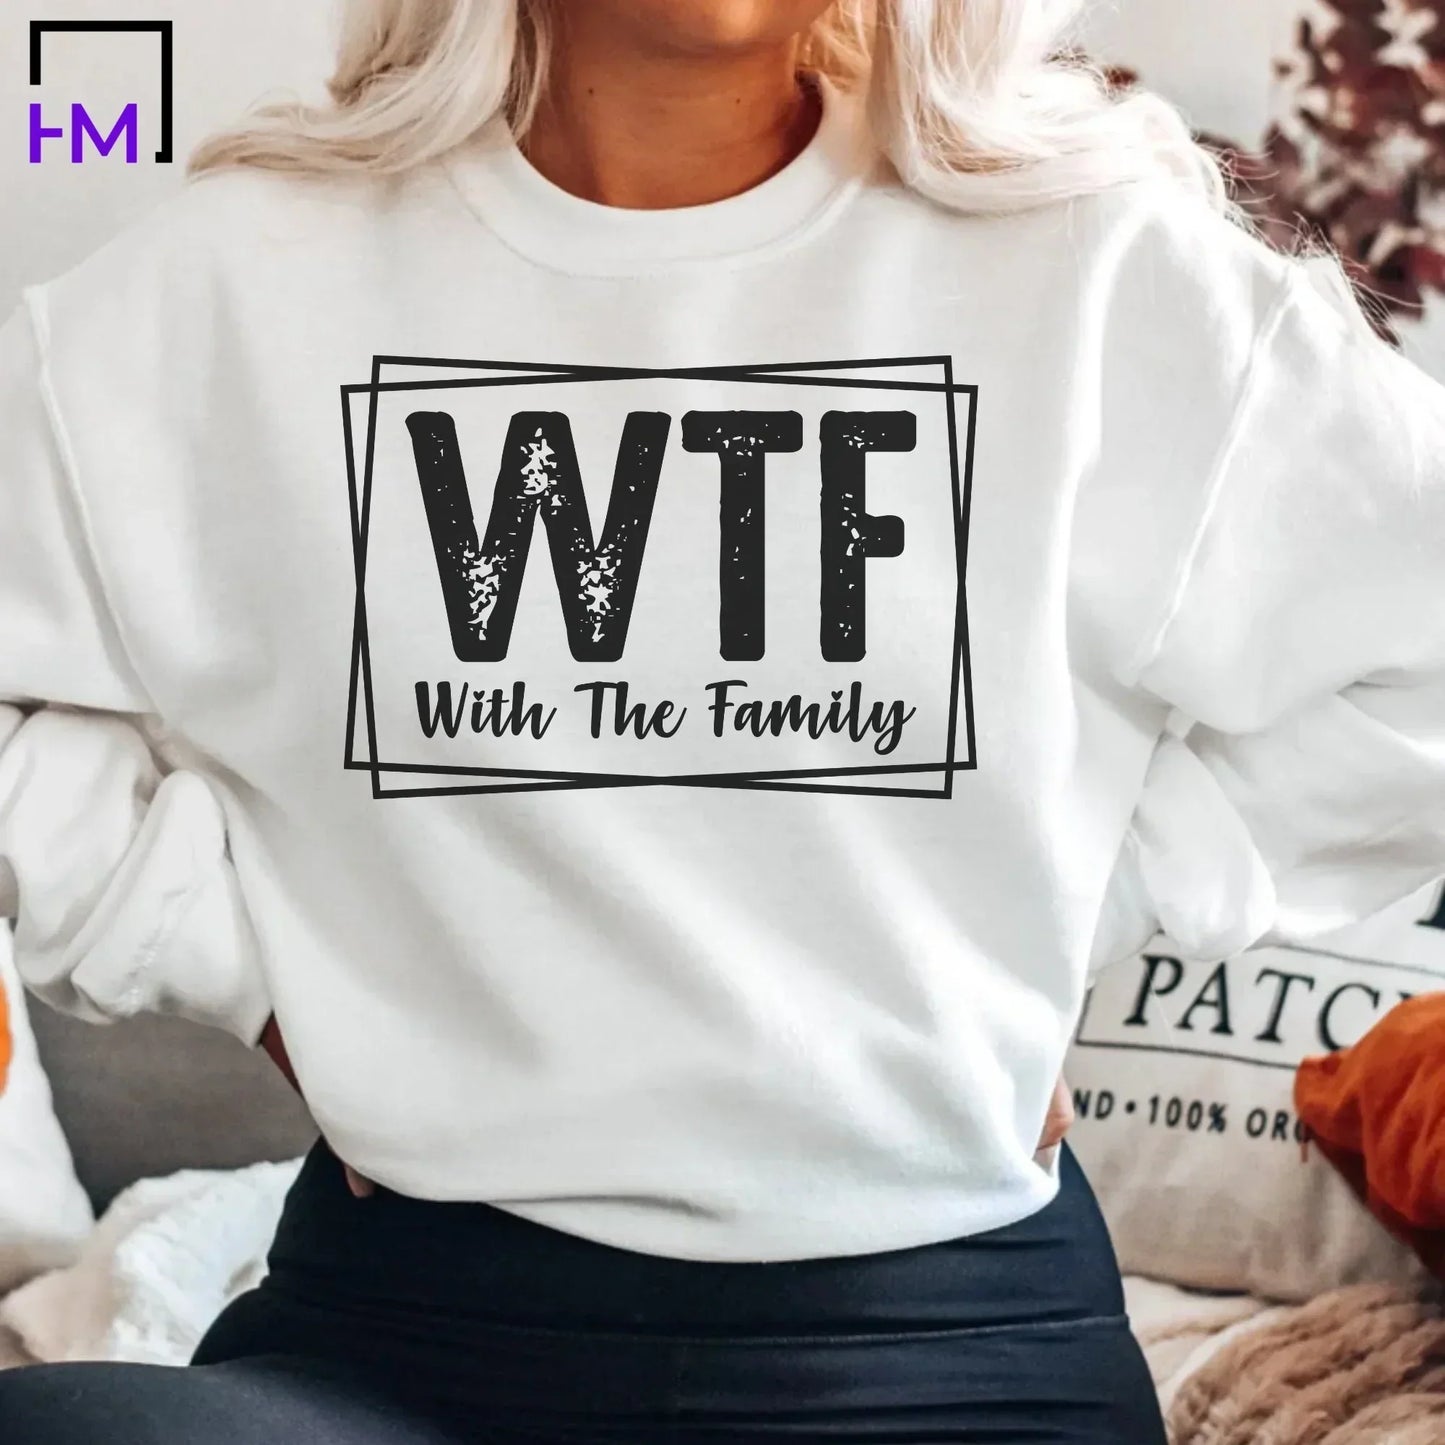 Family Vacation Shirt, WTF With the Family Shirts, Funny Family T-shirts, With the Family Shirts, Family Matching Shirt, Funny Family Shirts